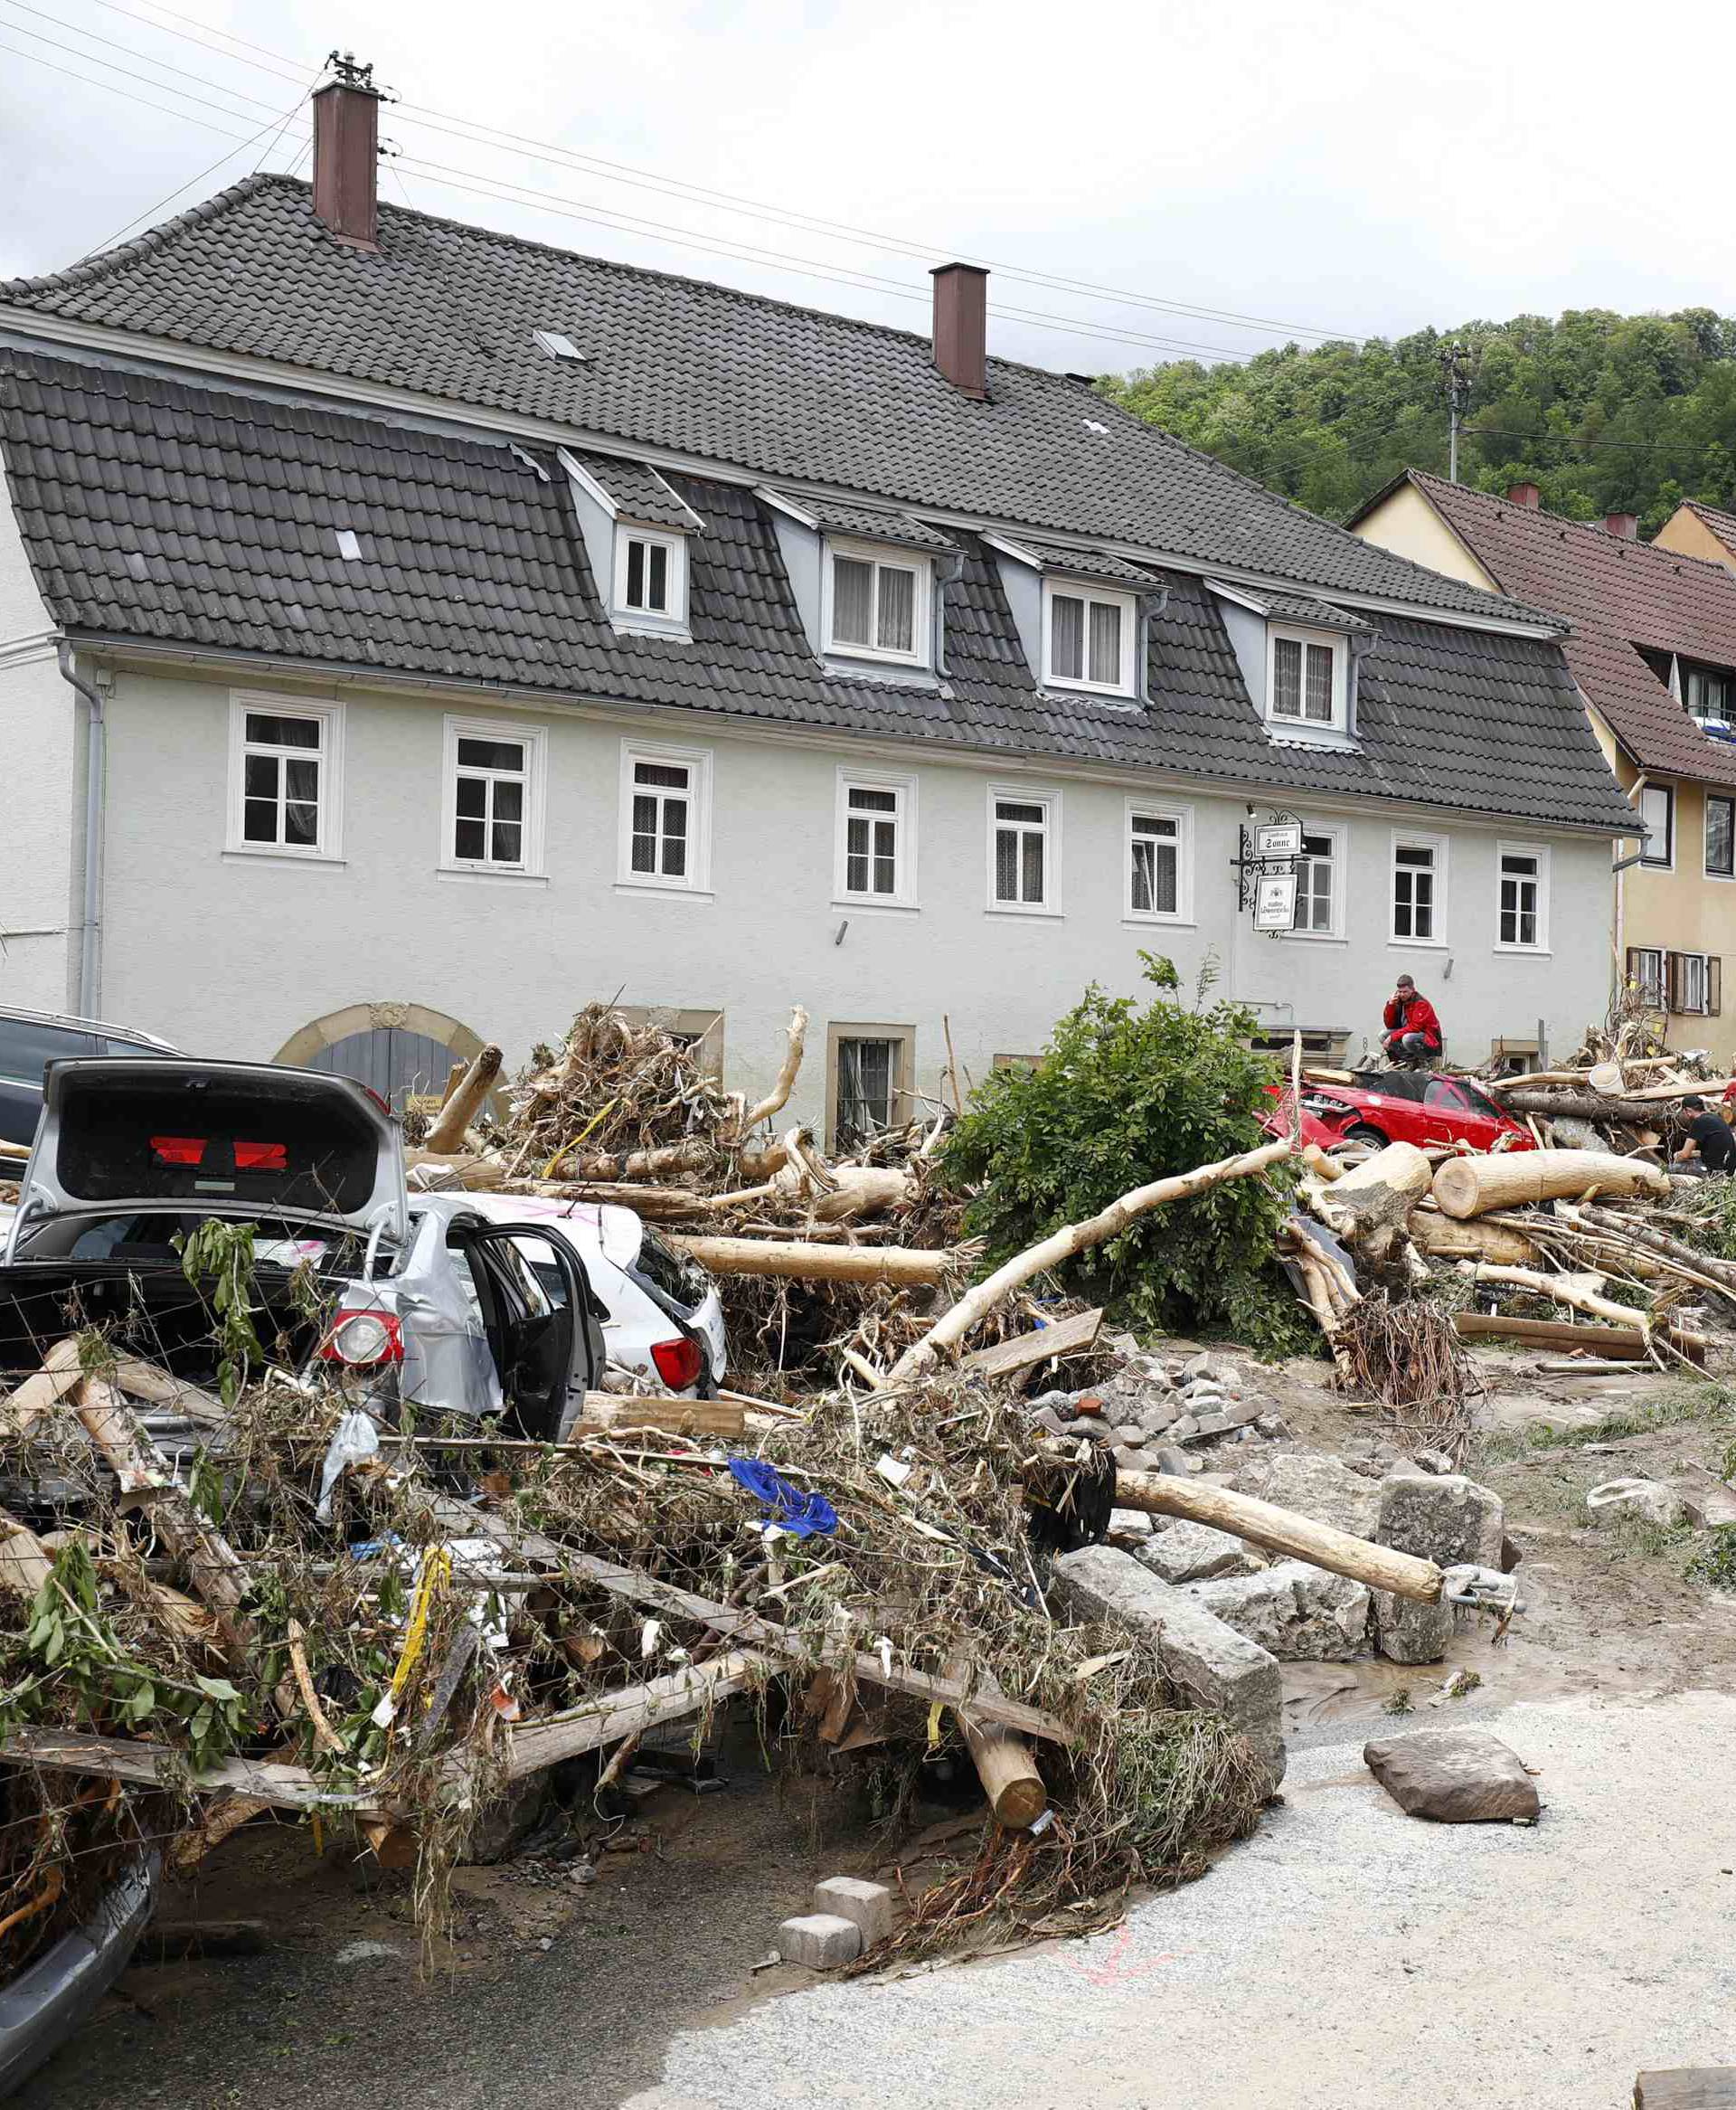 General view of the damage following floods in the town of Braunsbach in Baden-Wuerttemberg